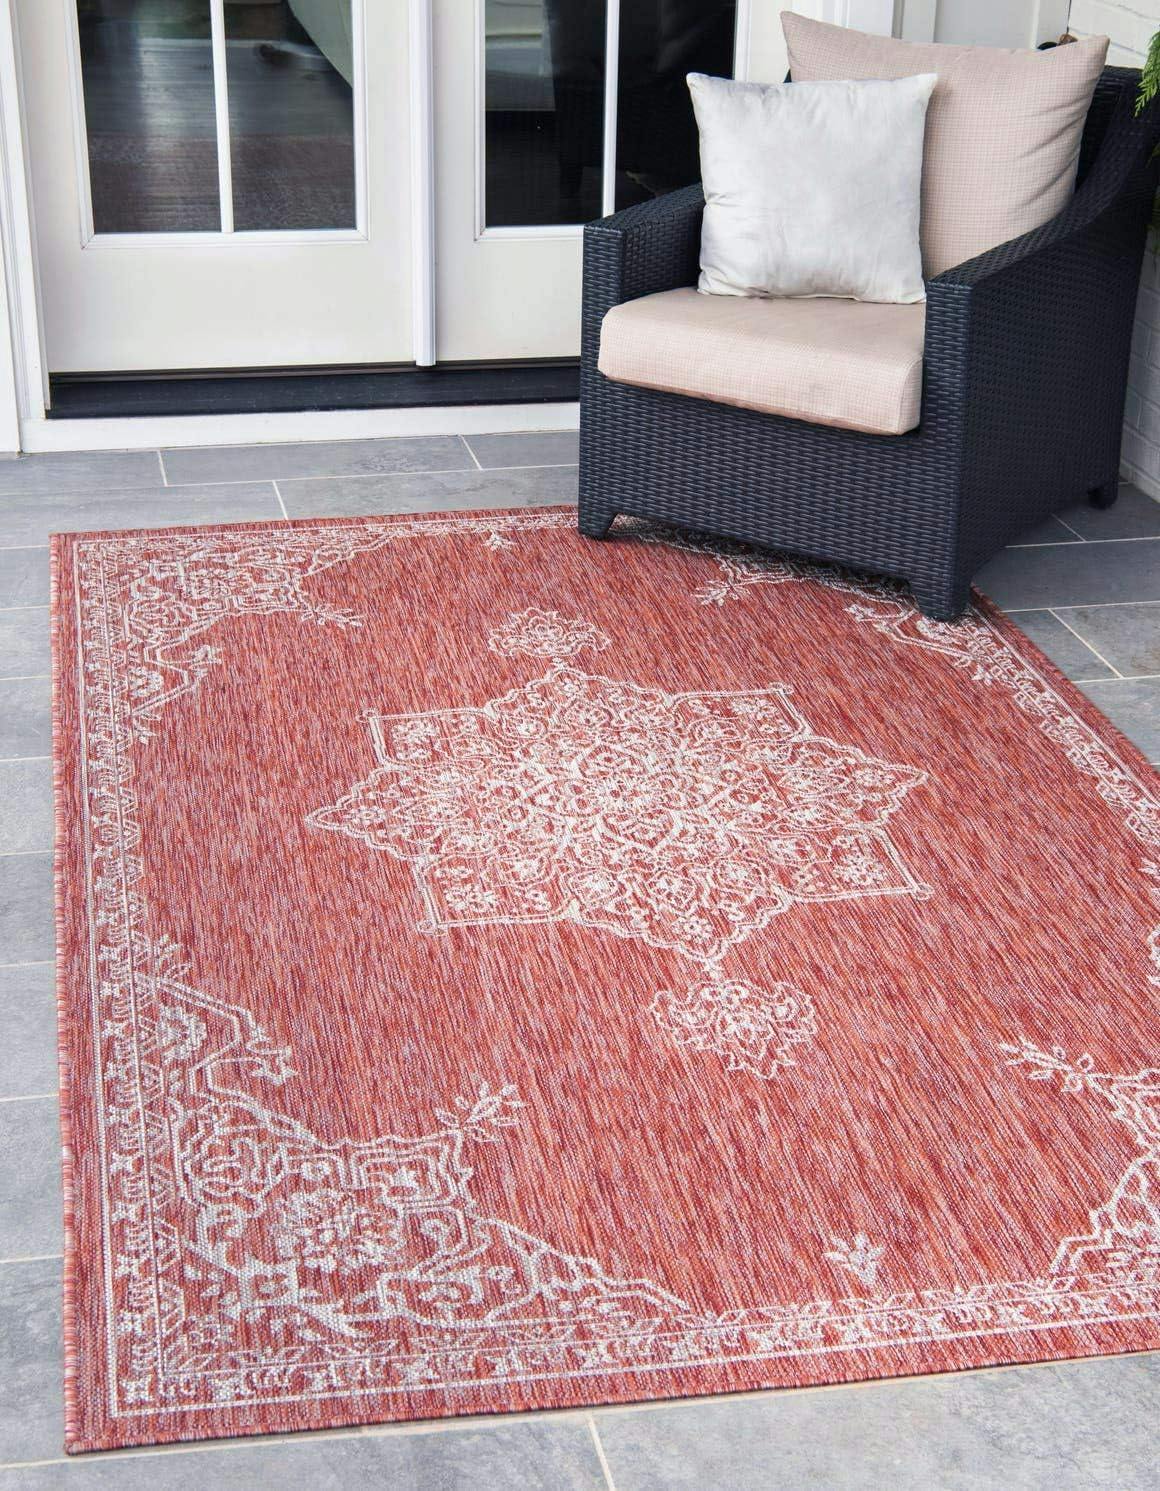 Rustic Rust Red 9' x 12' Synthetic Outdoor Area Rug